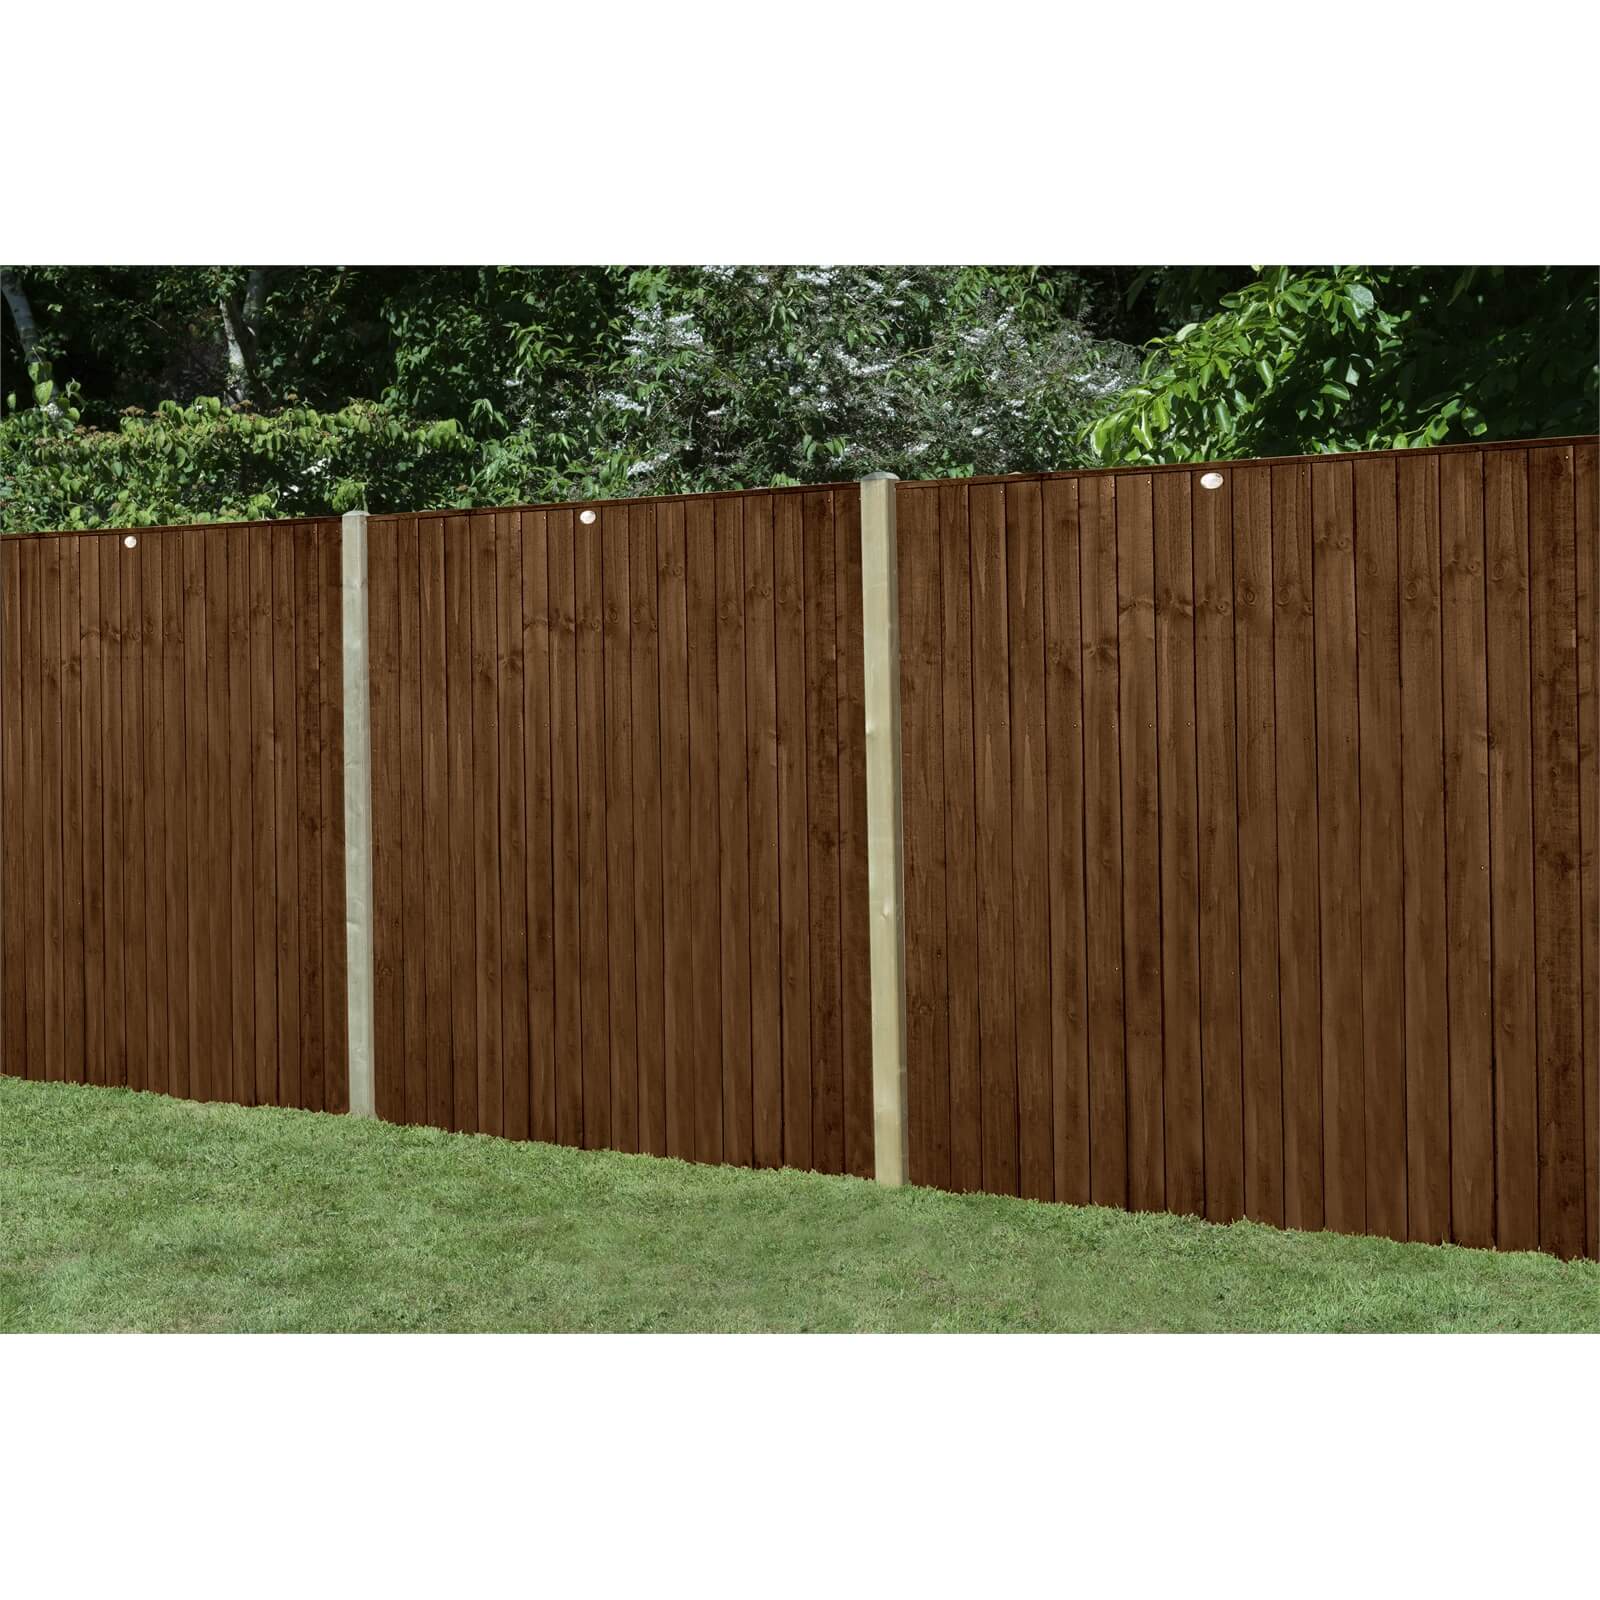 6ft x 5ft (1.83m x 1.54m) Pressure Treated Featheredge Fence Panel (Dark Brown) - Pack of 20